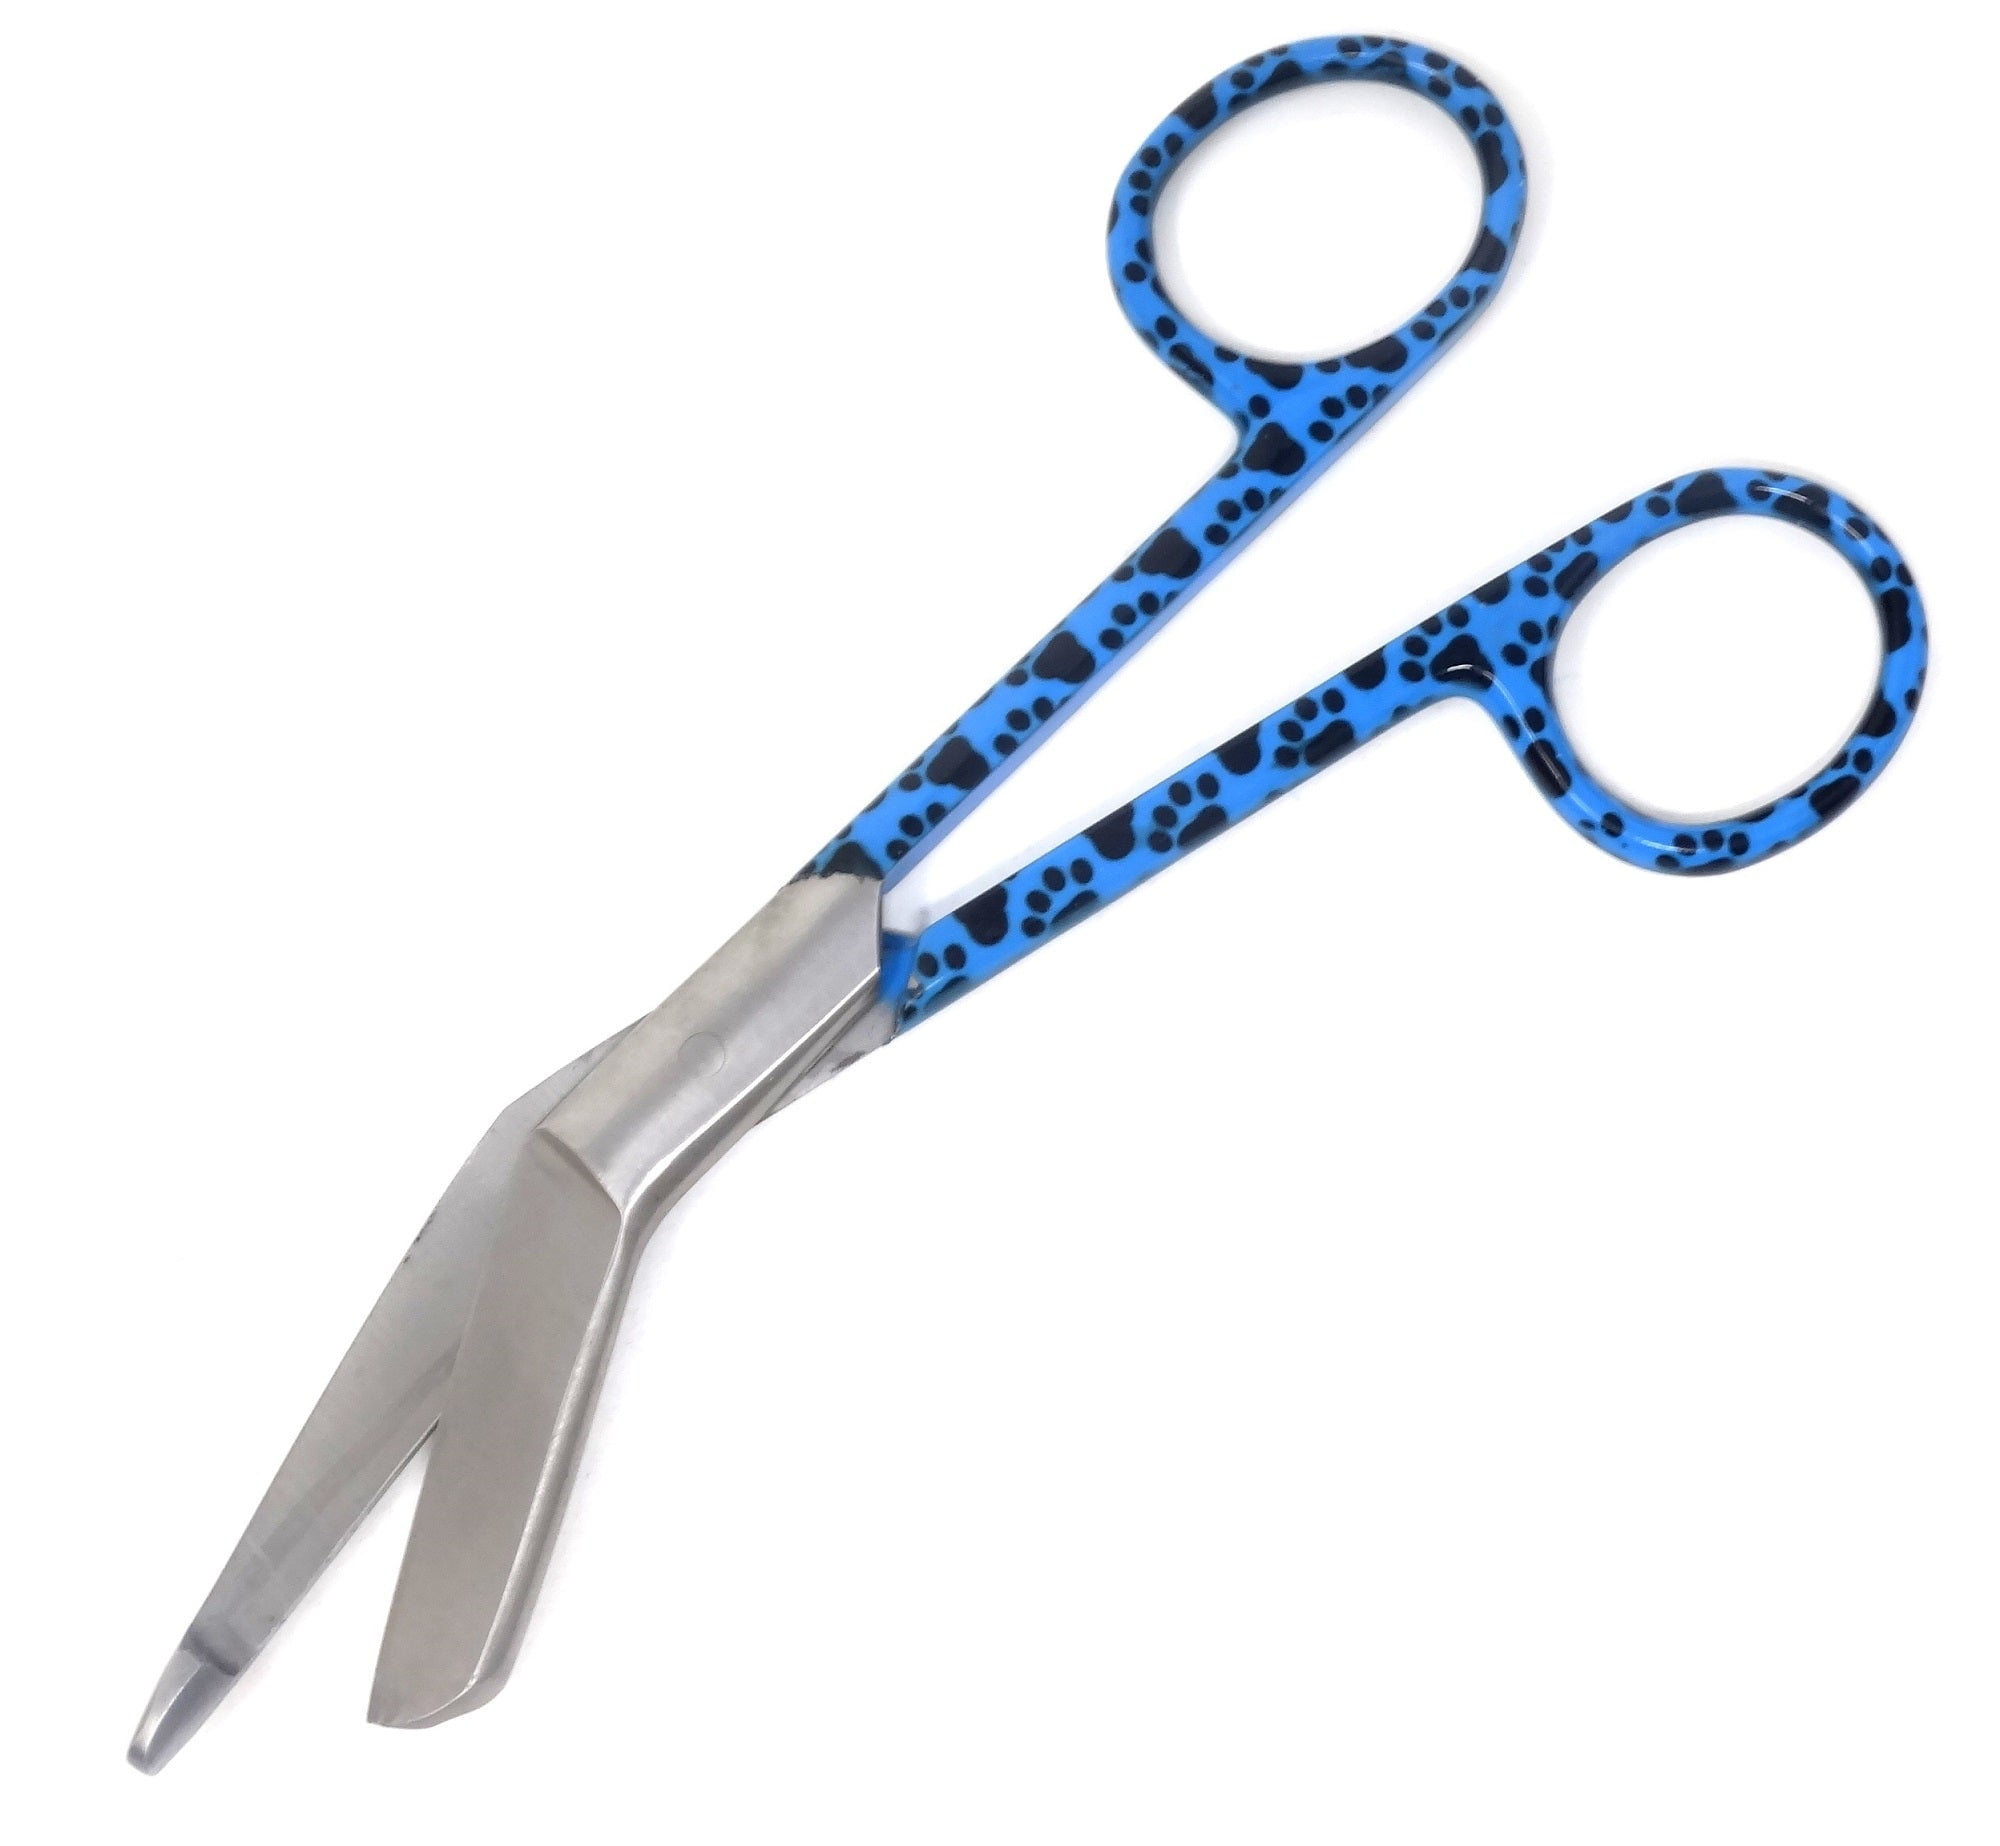 AAProTools Lister Bandage Scissors, Stainless Steel, Adult - Bulk Multipack  - Select Quantity (Blue, 3.5-10 Pack)